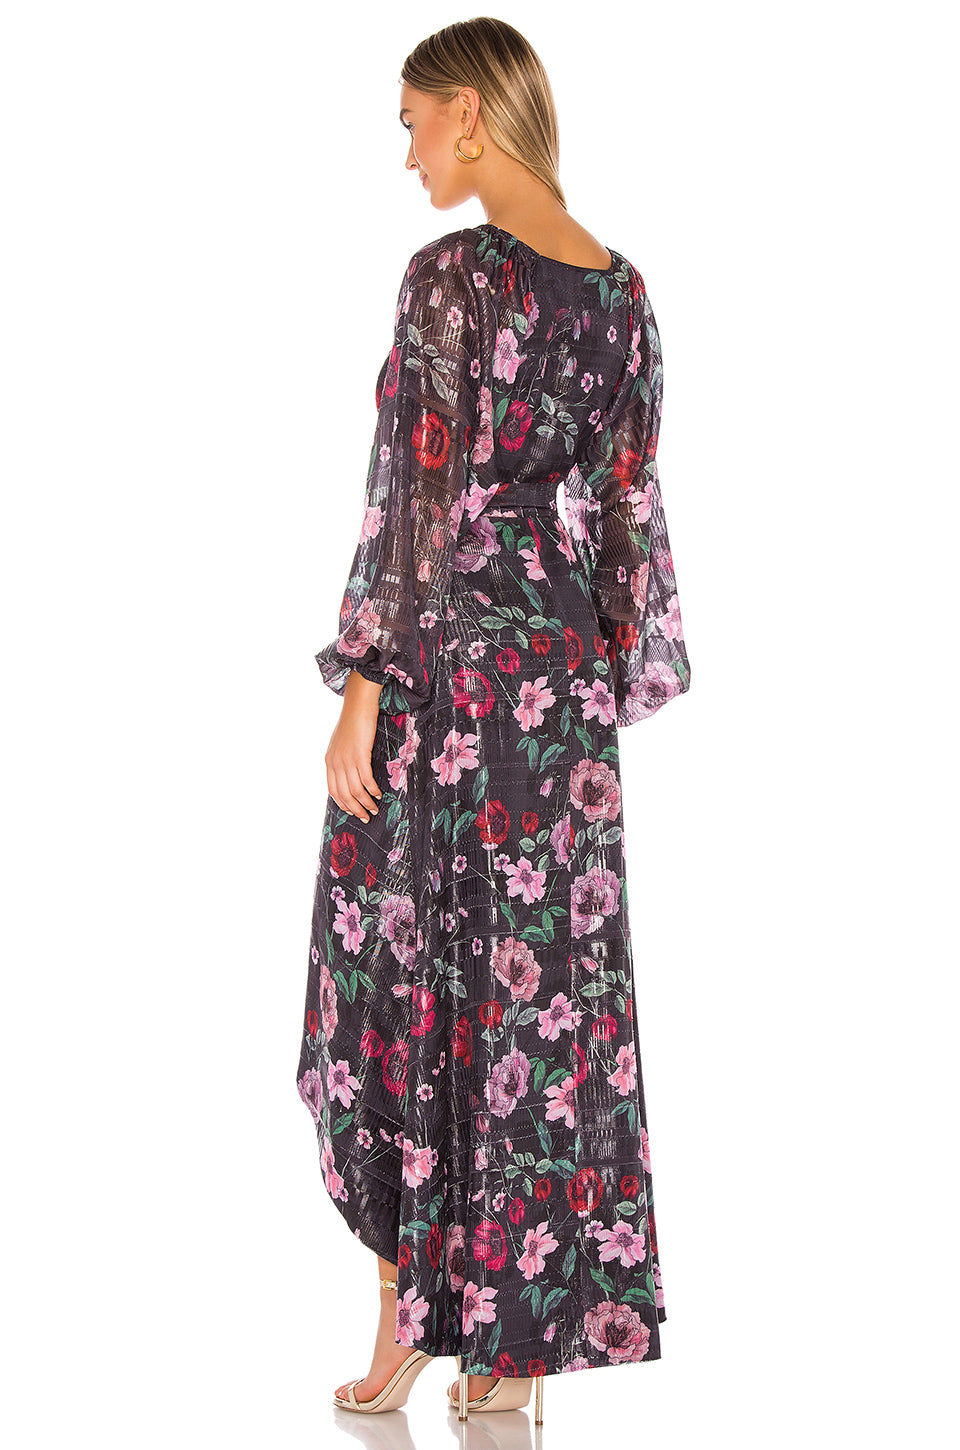 Cora Wrap Dress in MIDNIGHT FLORAL